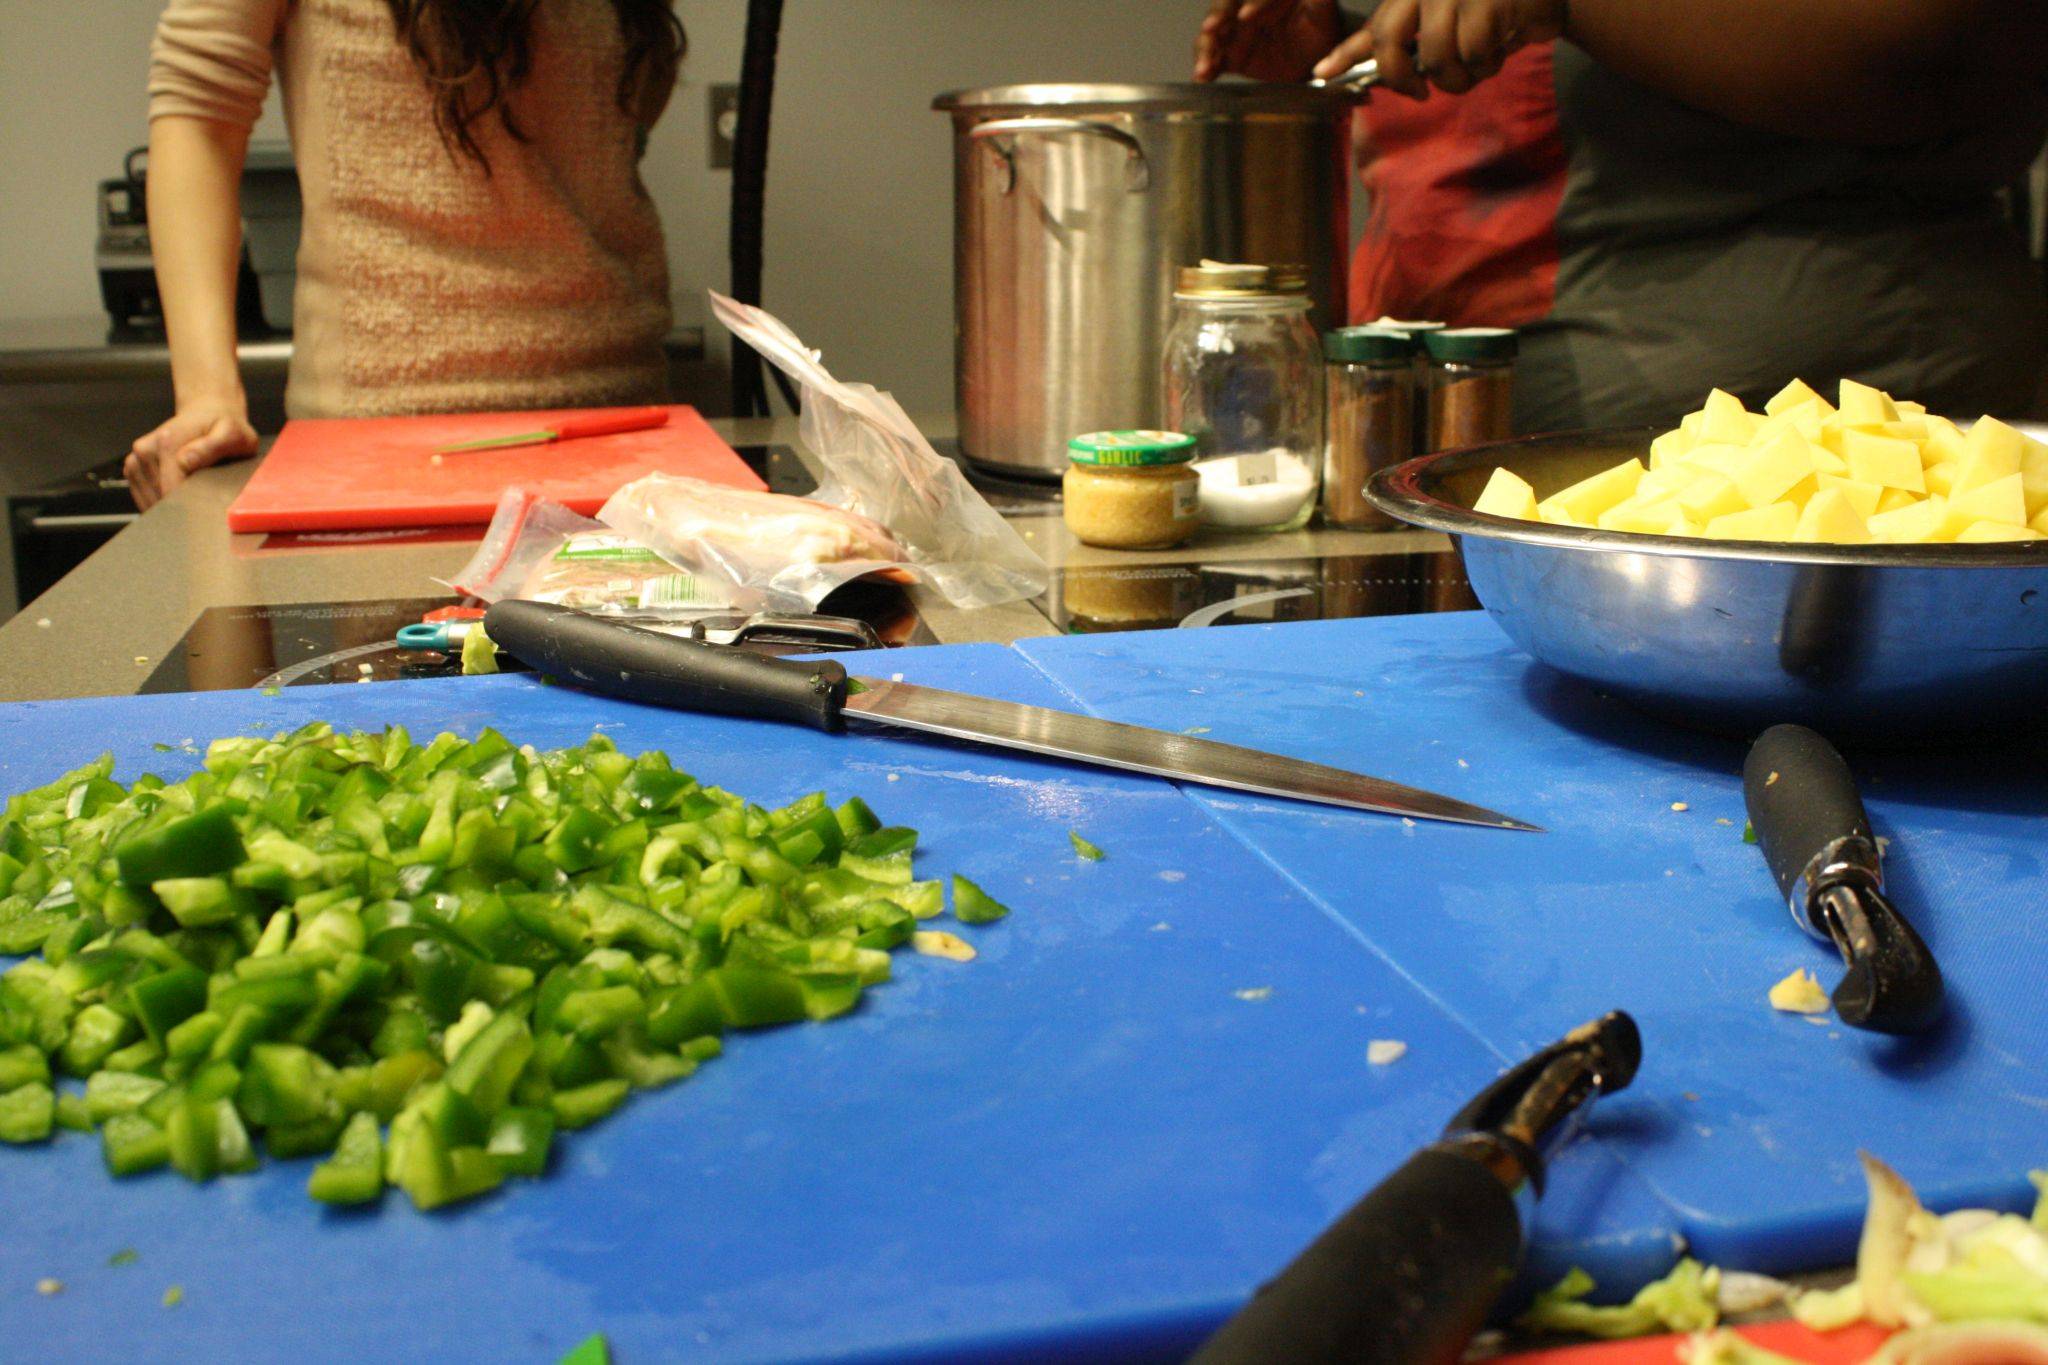 Cooking for community: A “rustic” affair